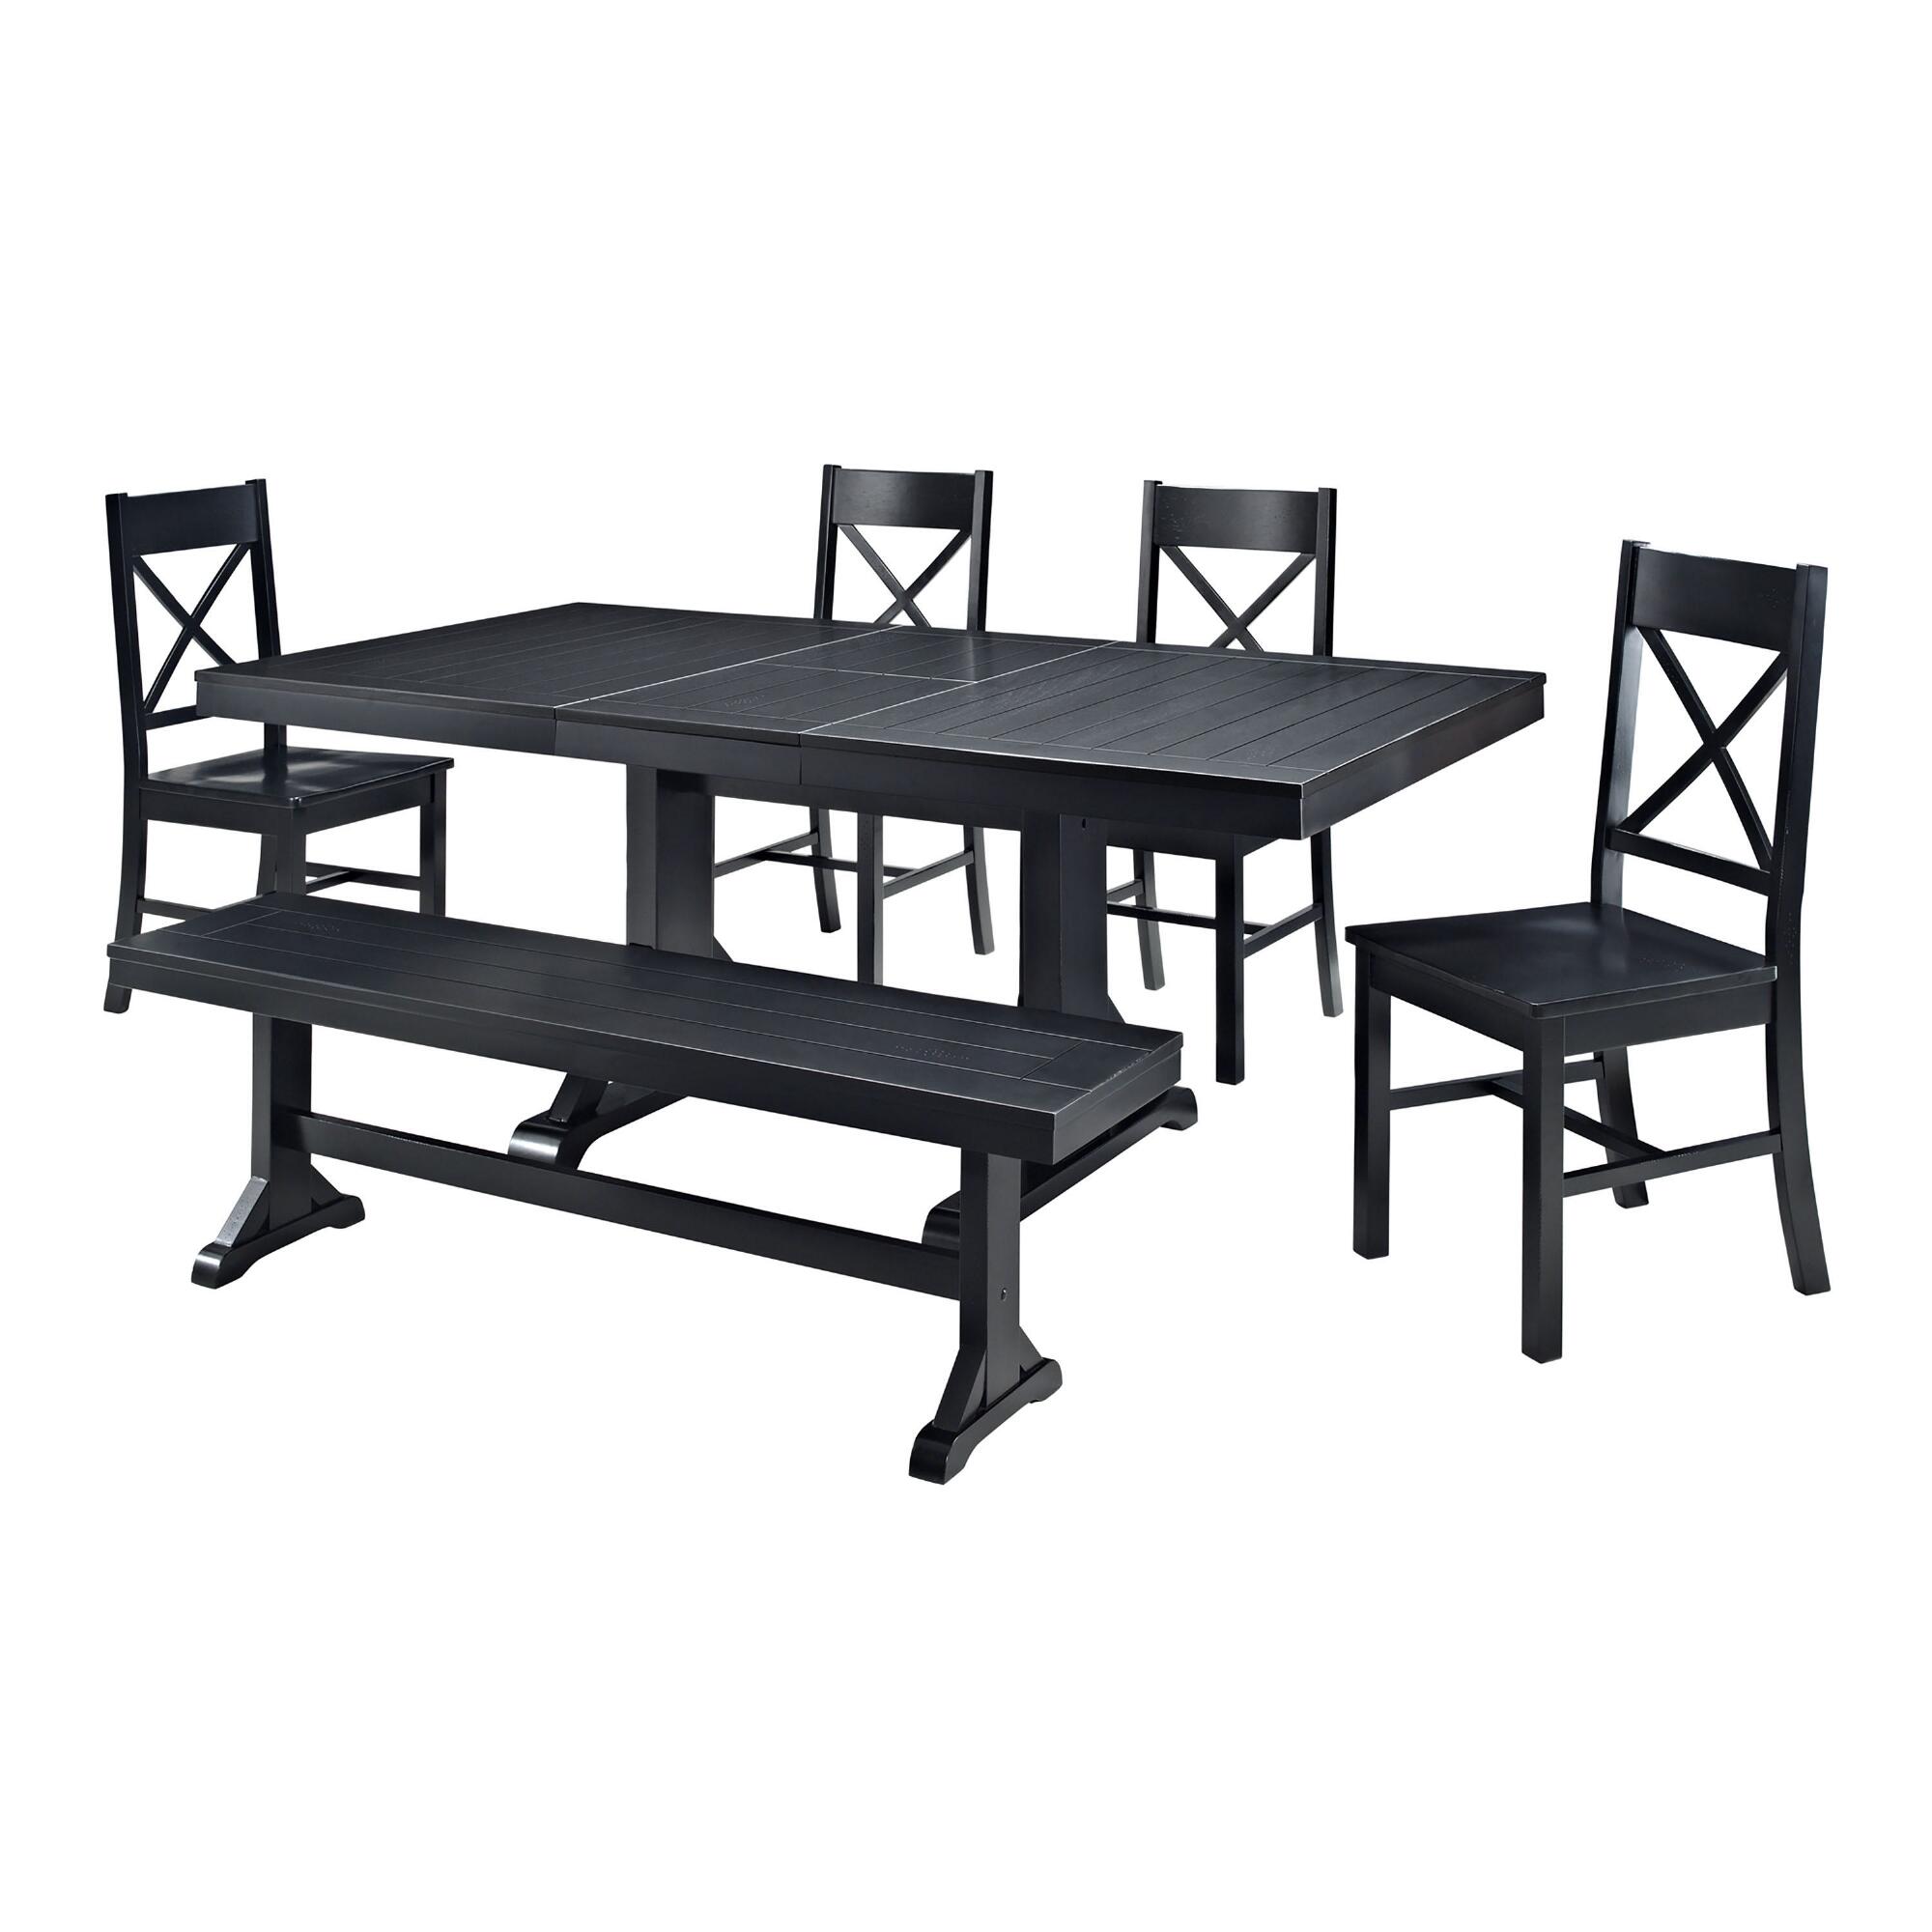 Distressed Black Wood Montgomery Dining Collection by World Market